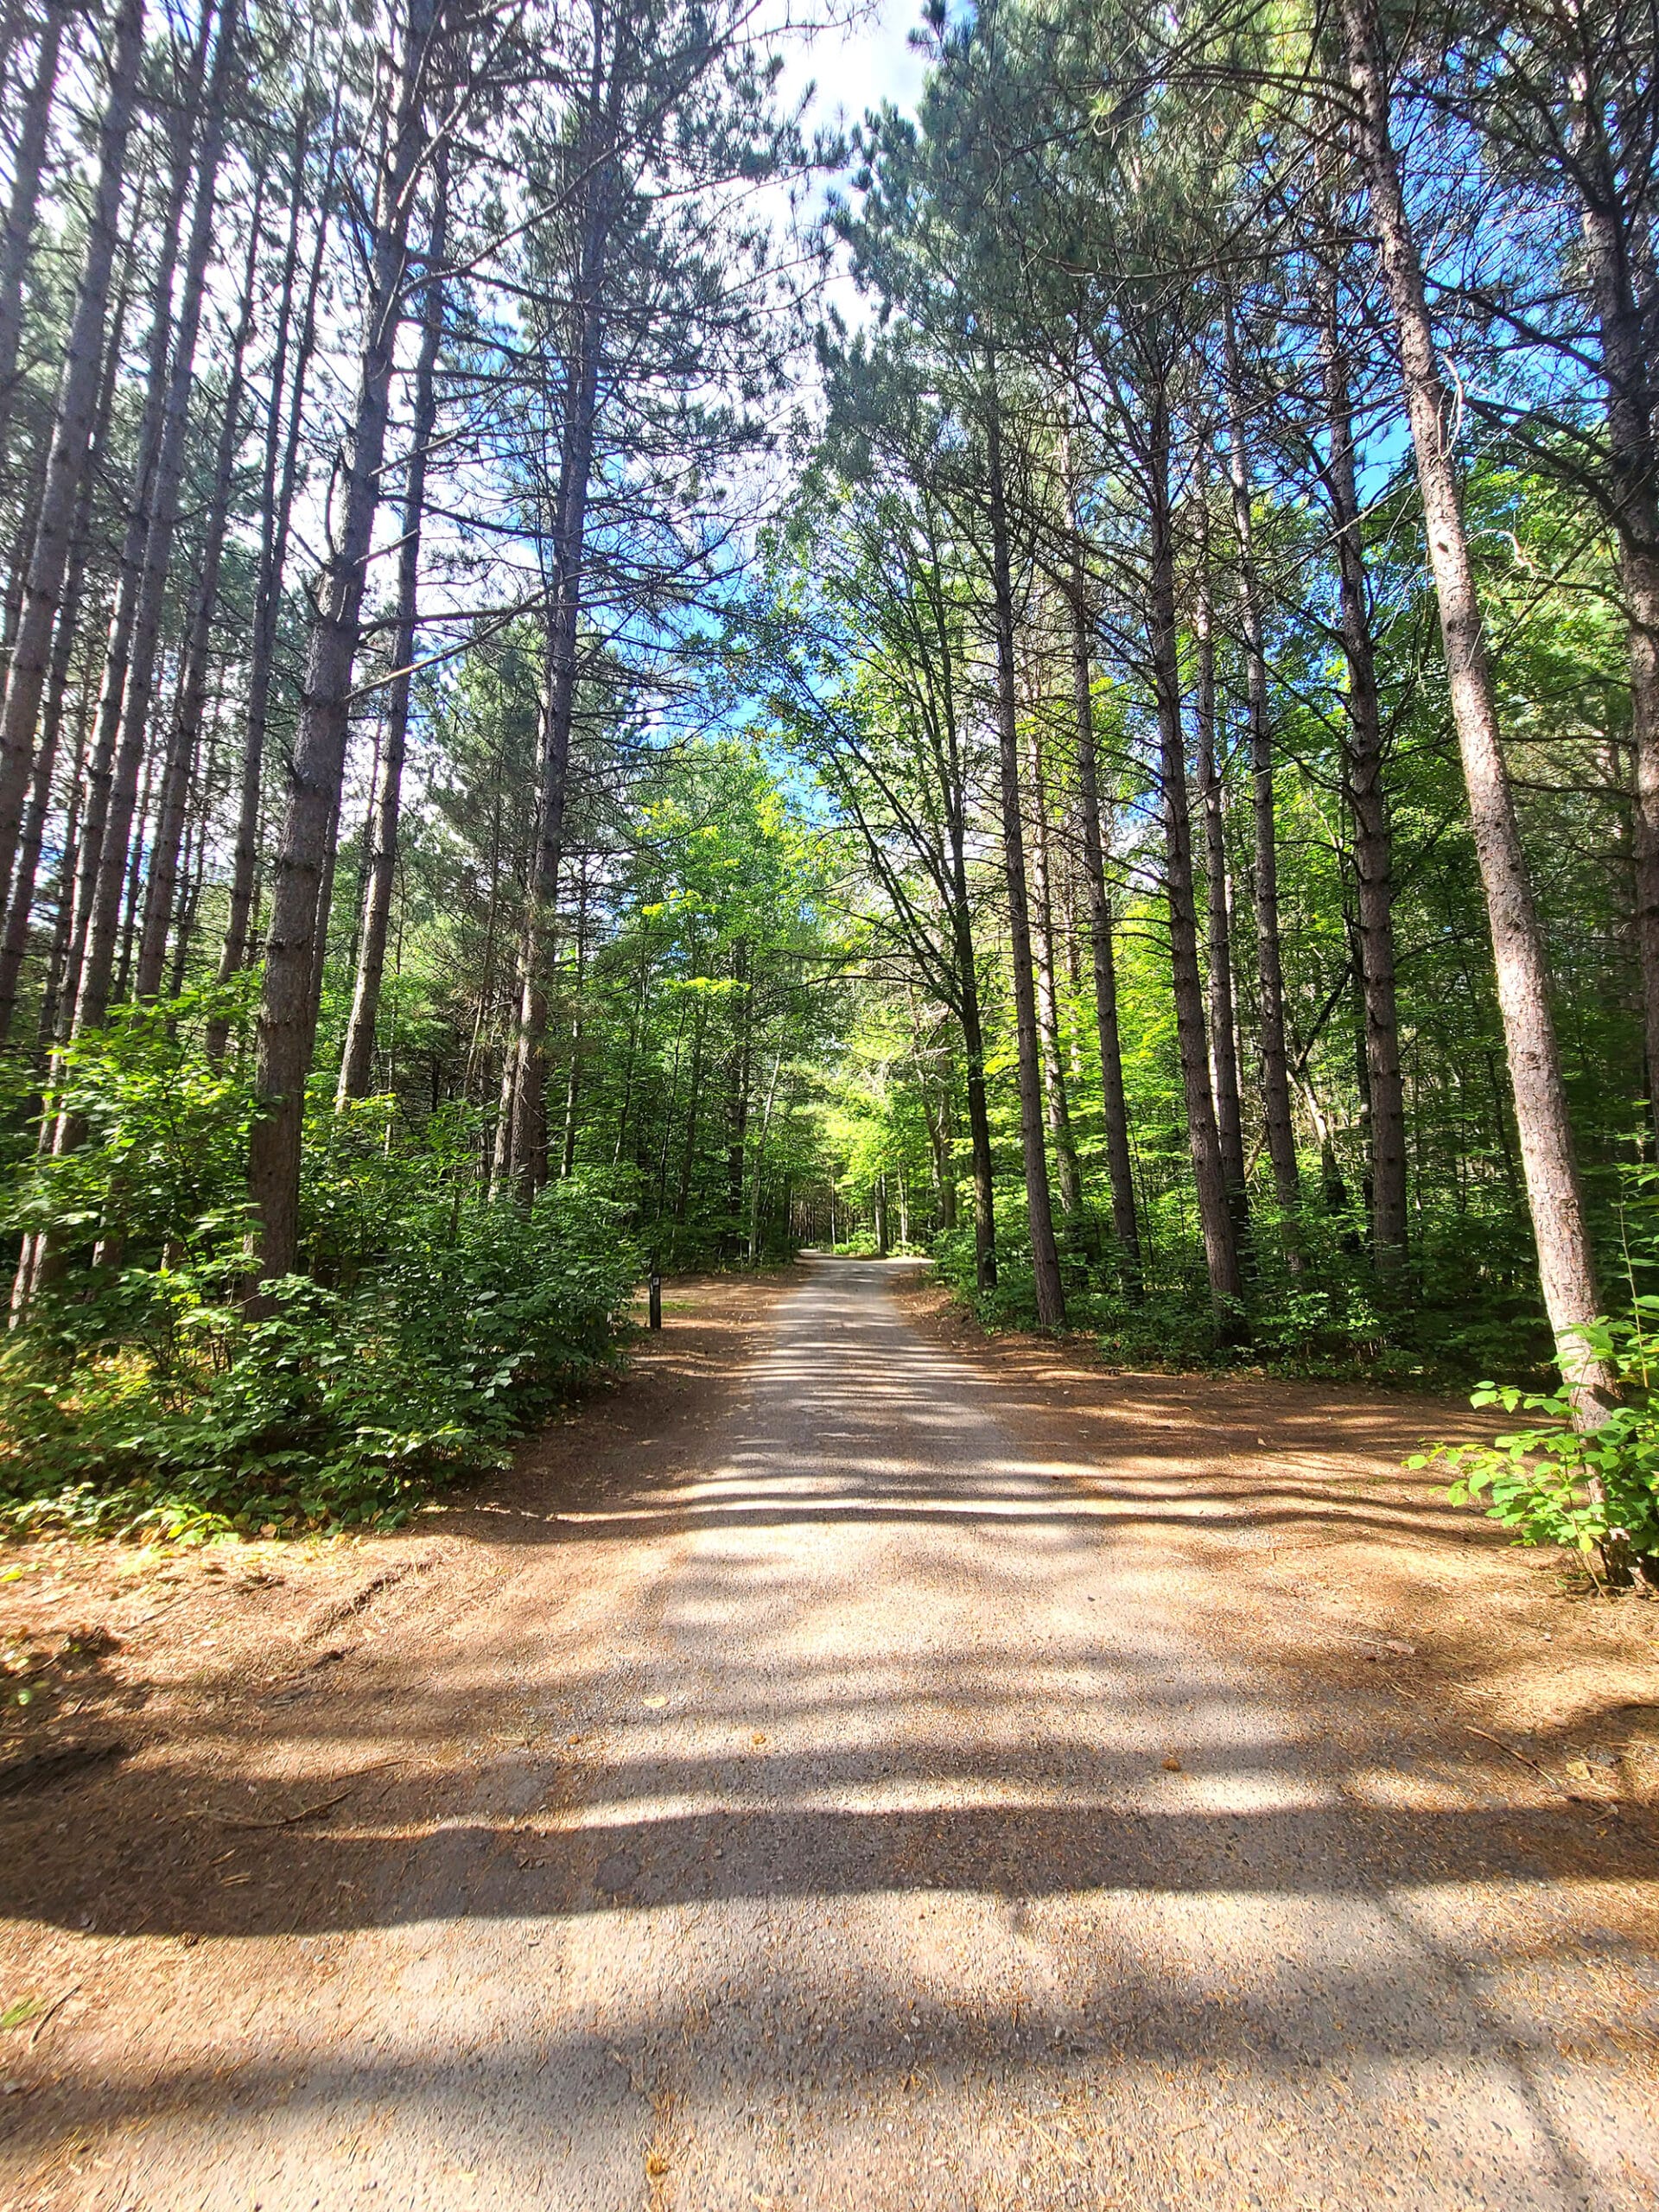 A narrow gravel road surrounded by tall pine trees.